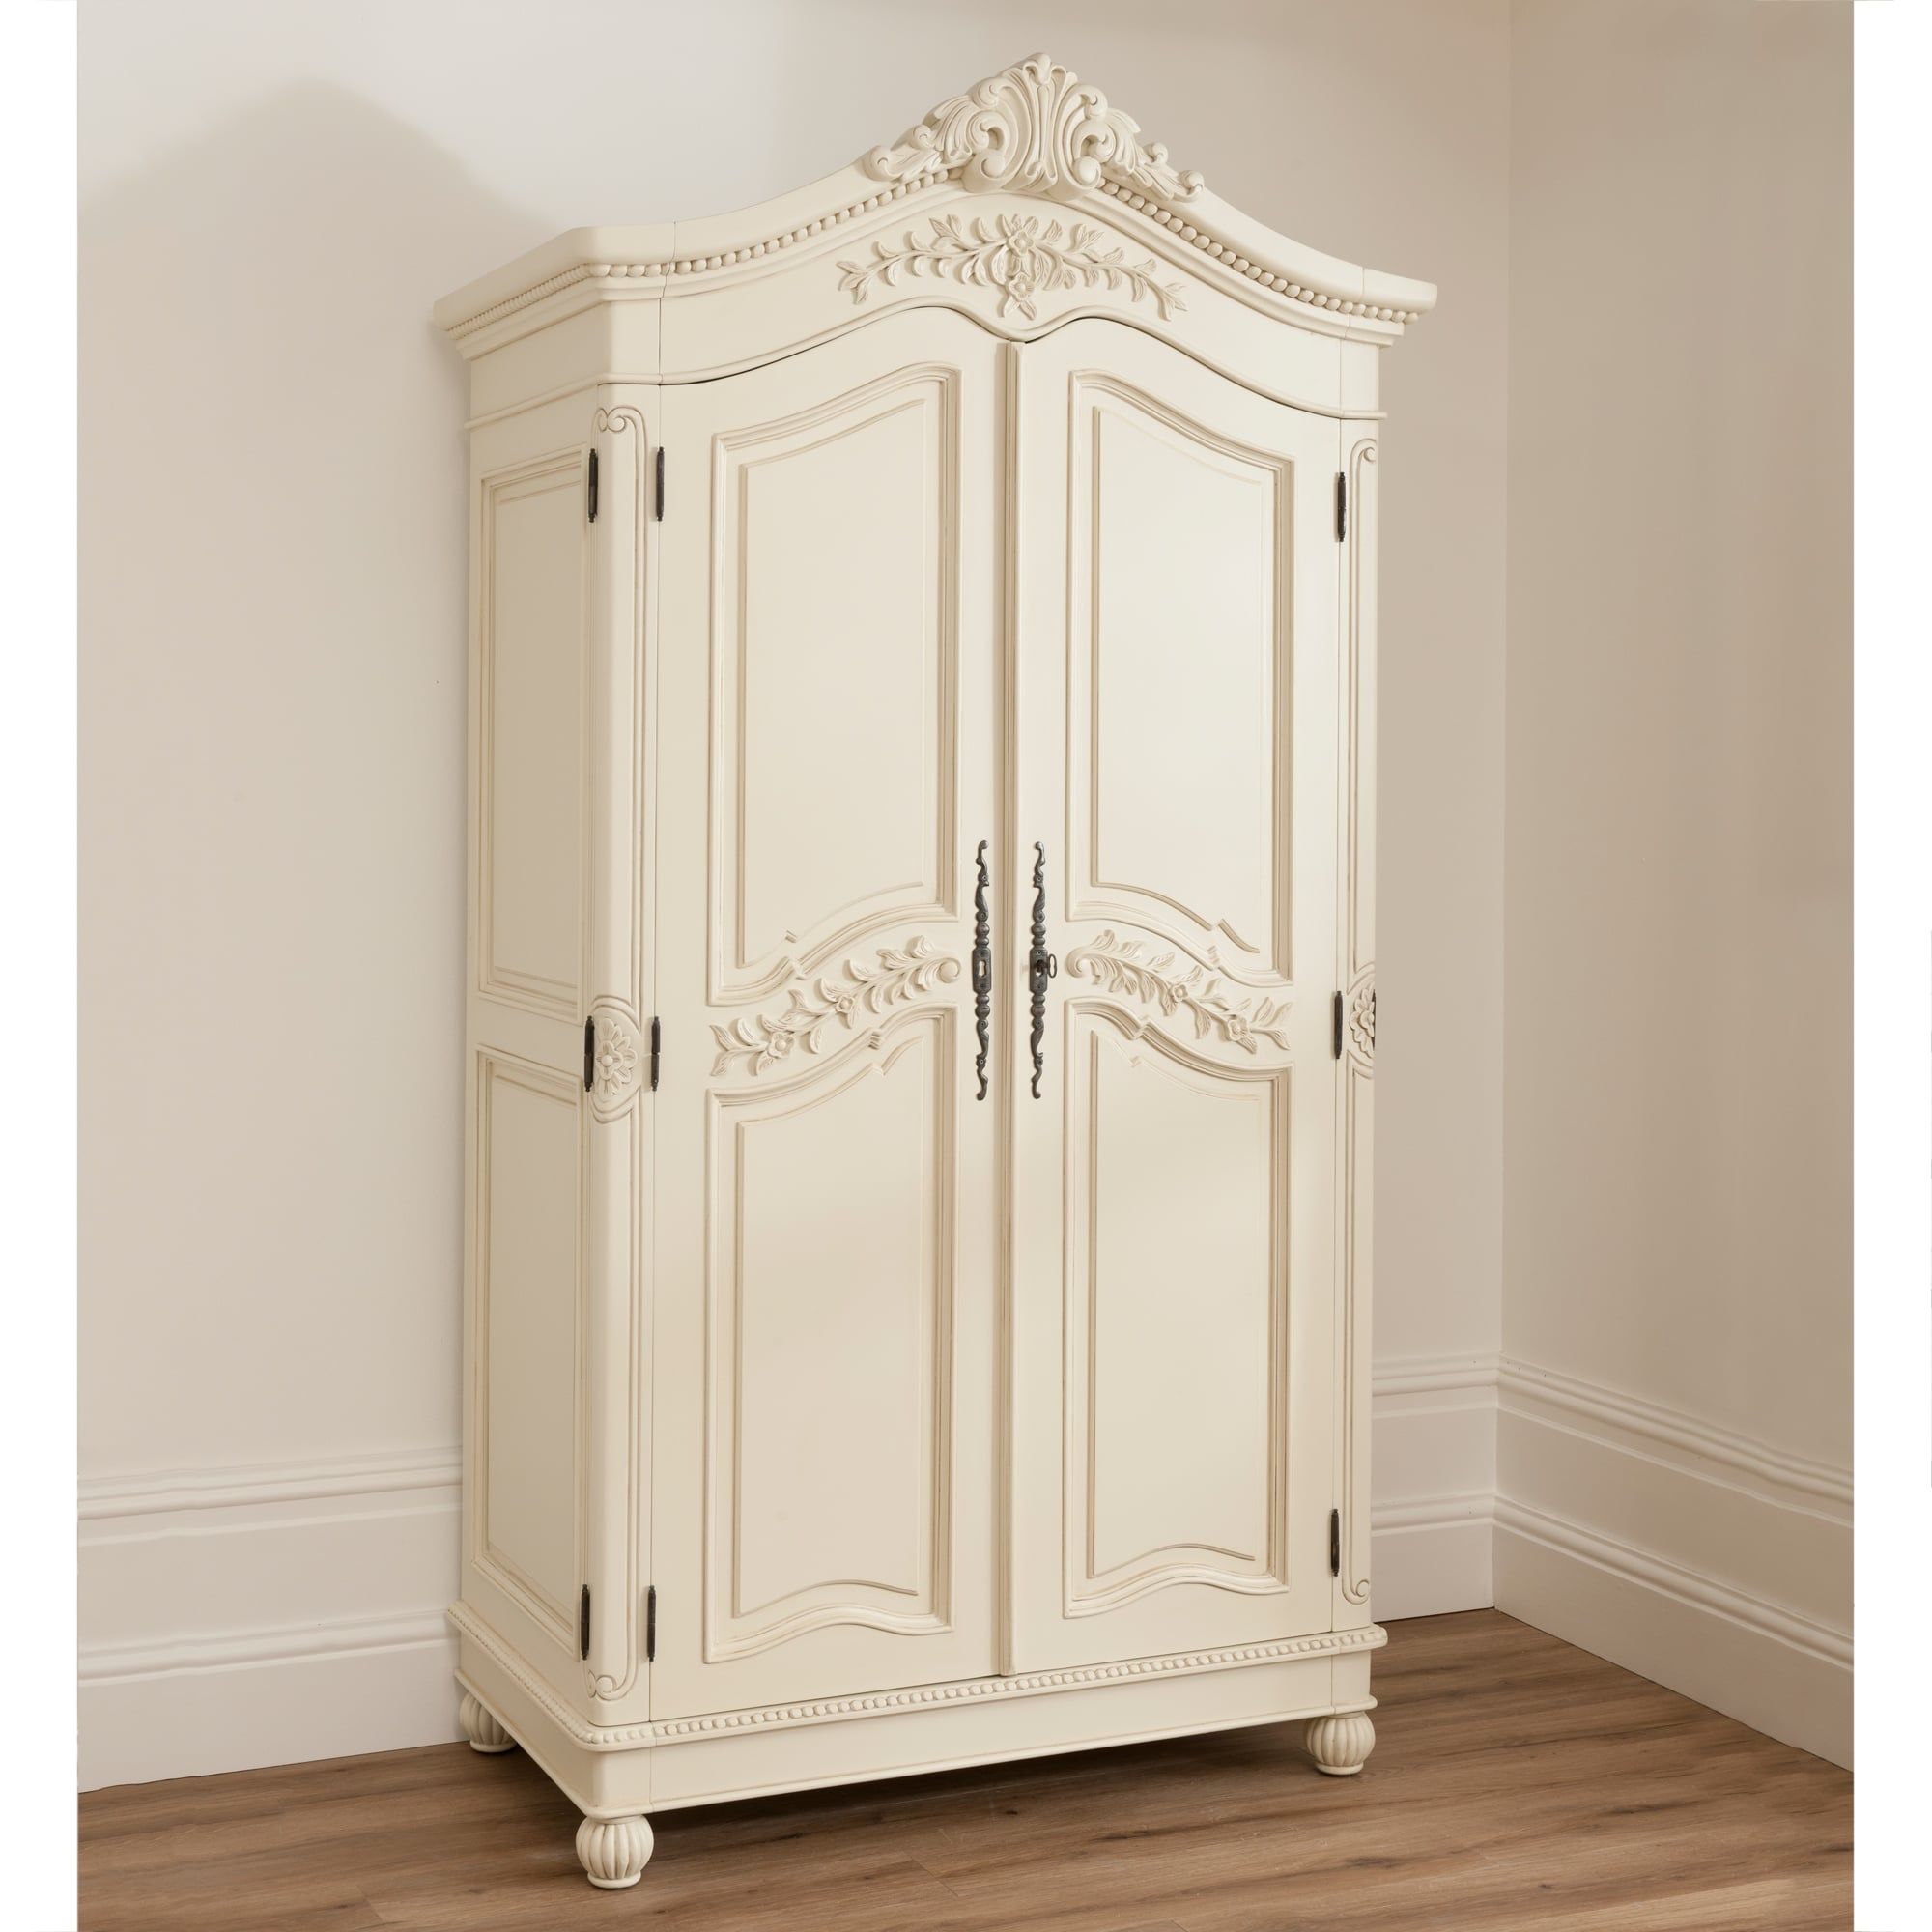 Bordeaux Ivory Shabby Chic Wardrobe | Shabby Chic Furniture Intended For Vintage Shabby Chic Wardrobes (View 5 of 15)